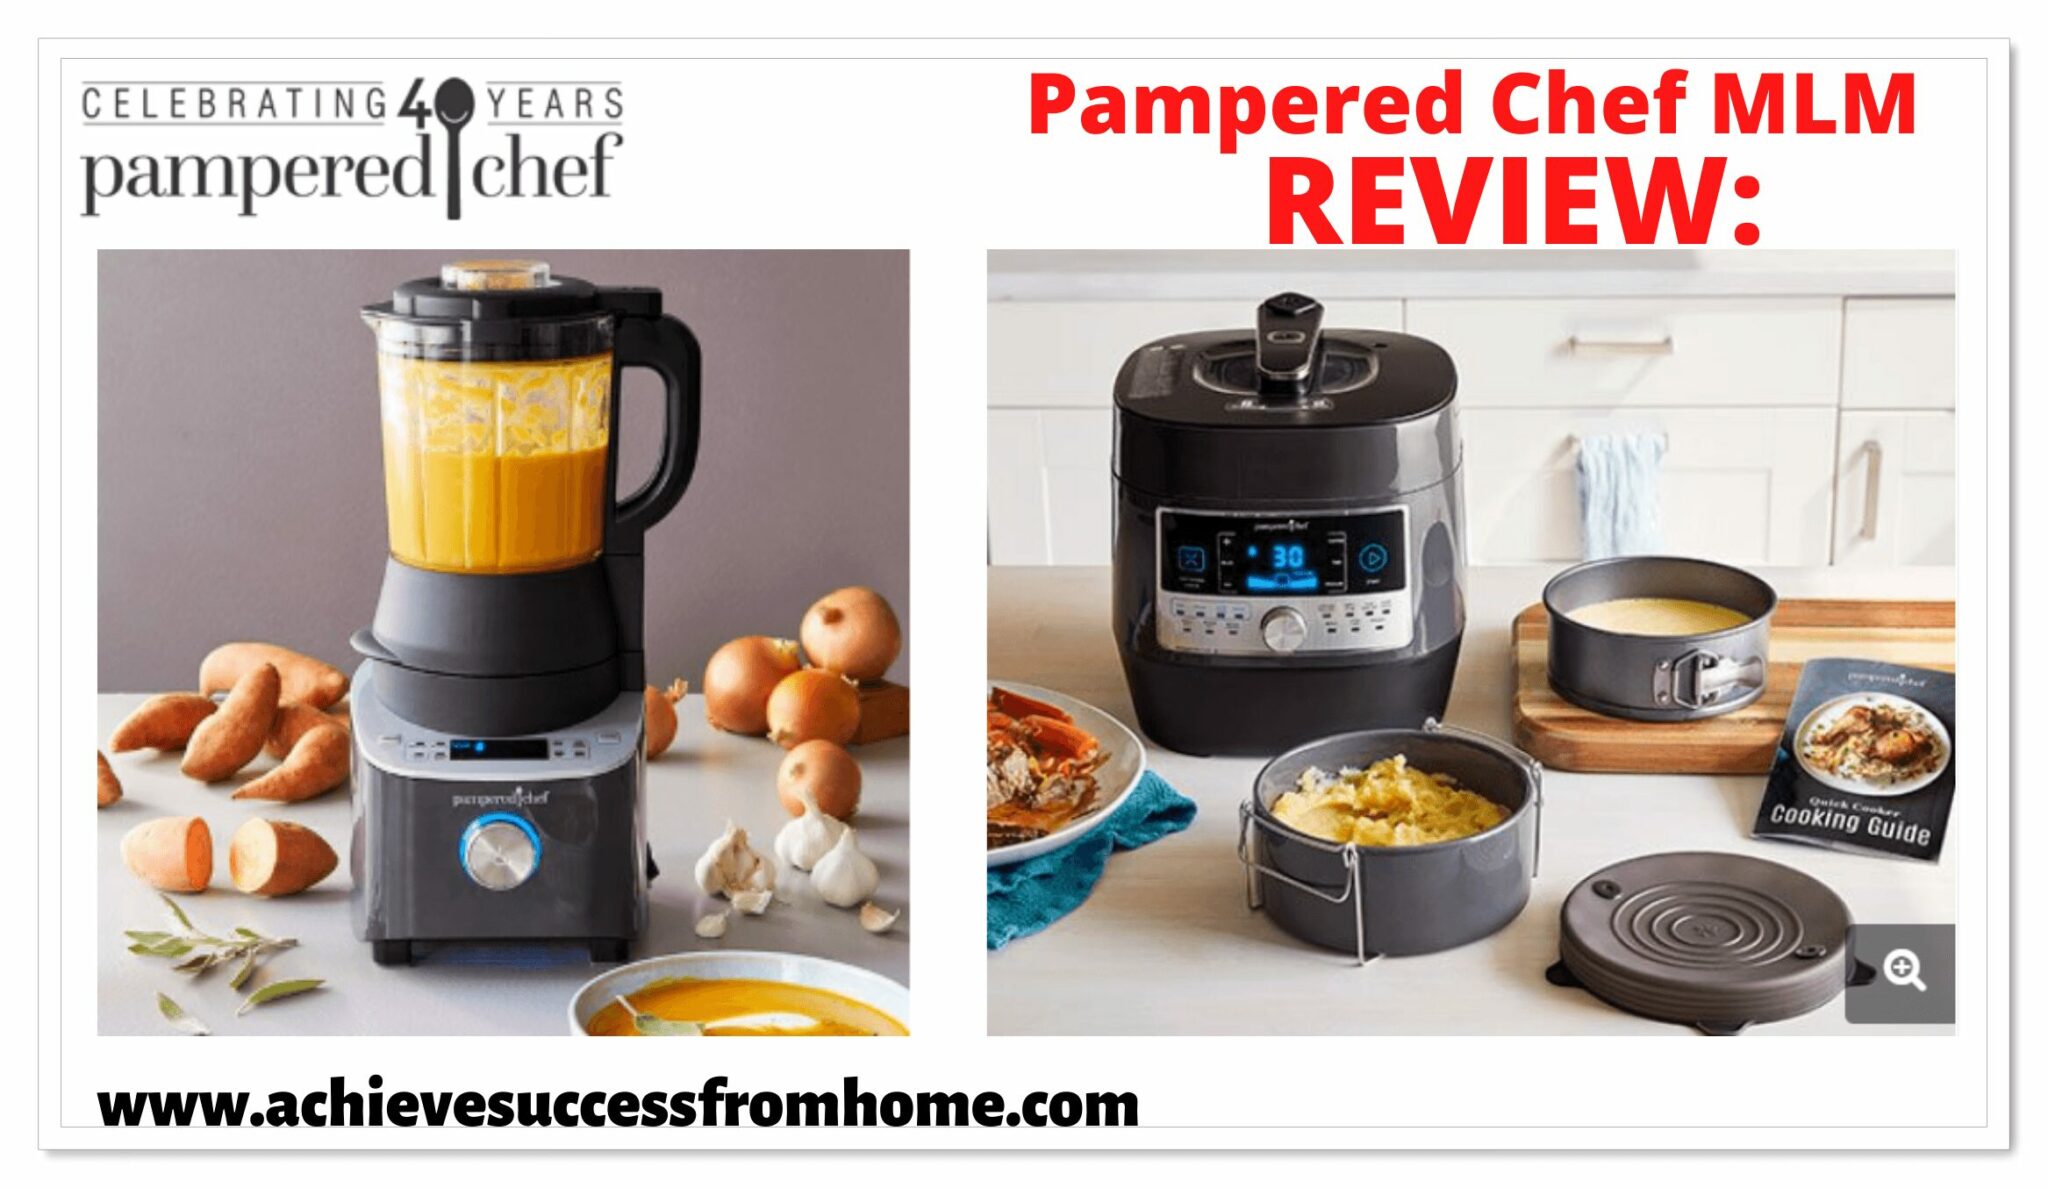 The Pampered Chef MLM Review